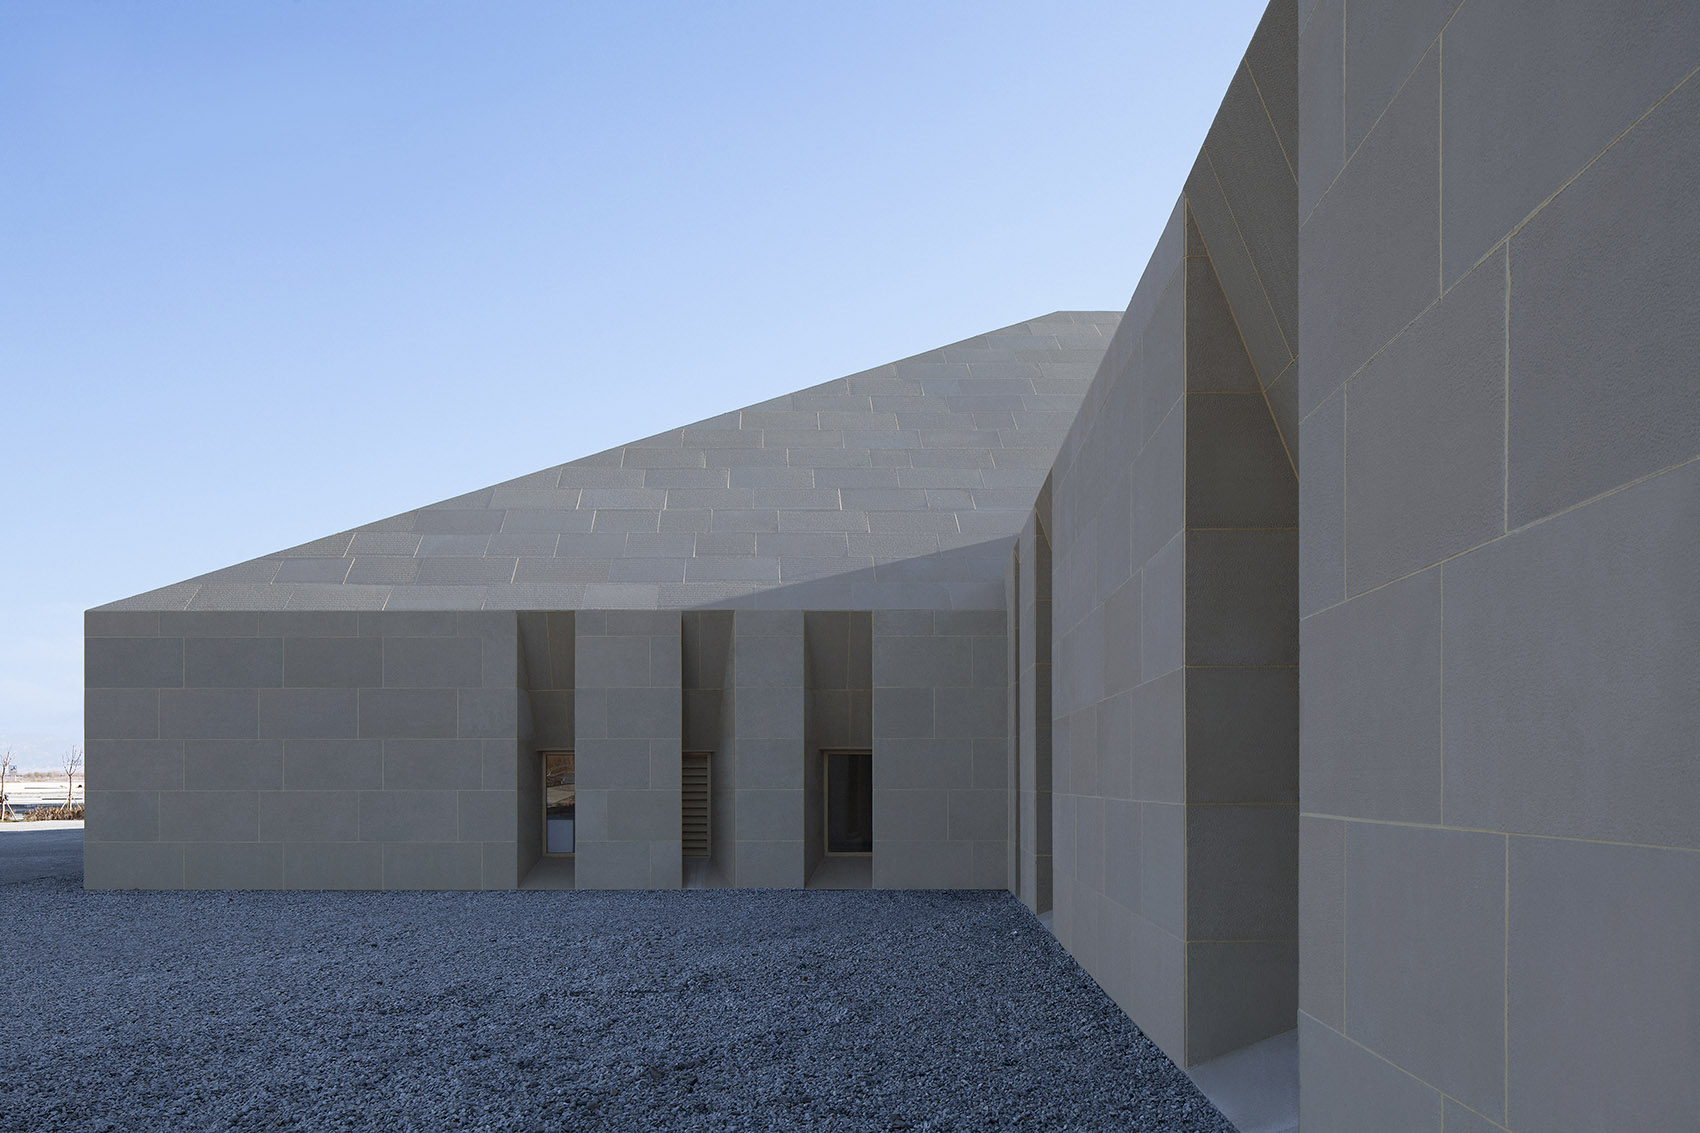 004-dunhuang-tourism-distributing-center-china-by-biad-zxd-architects.jpg